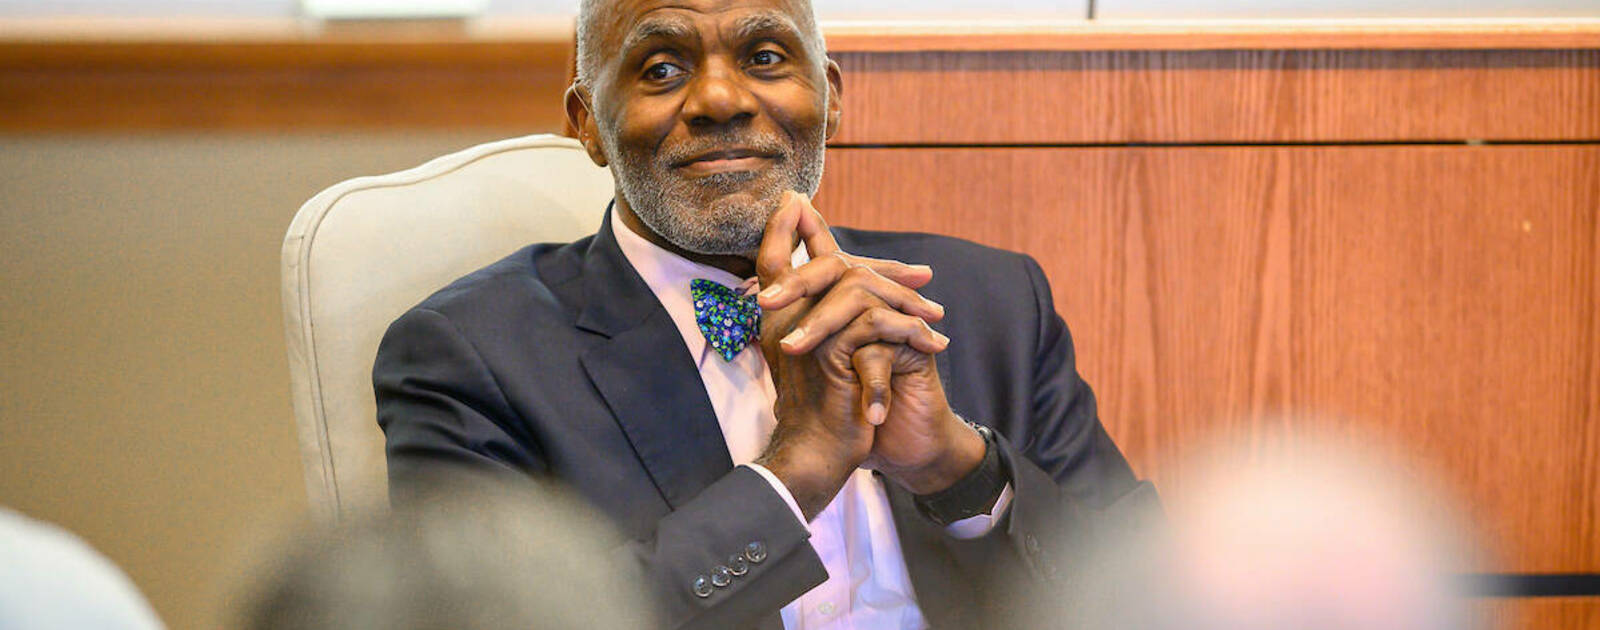 Alumnus Alan Page, trailblazing jurist and Hall of Fame football player, to  be featured speaker at MLK Day event, News, Notre Dame News